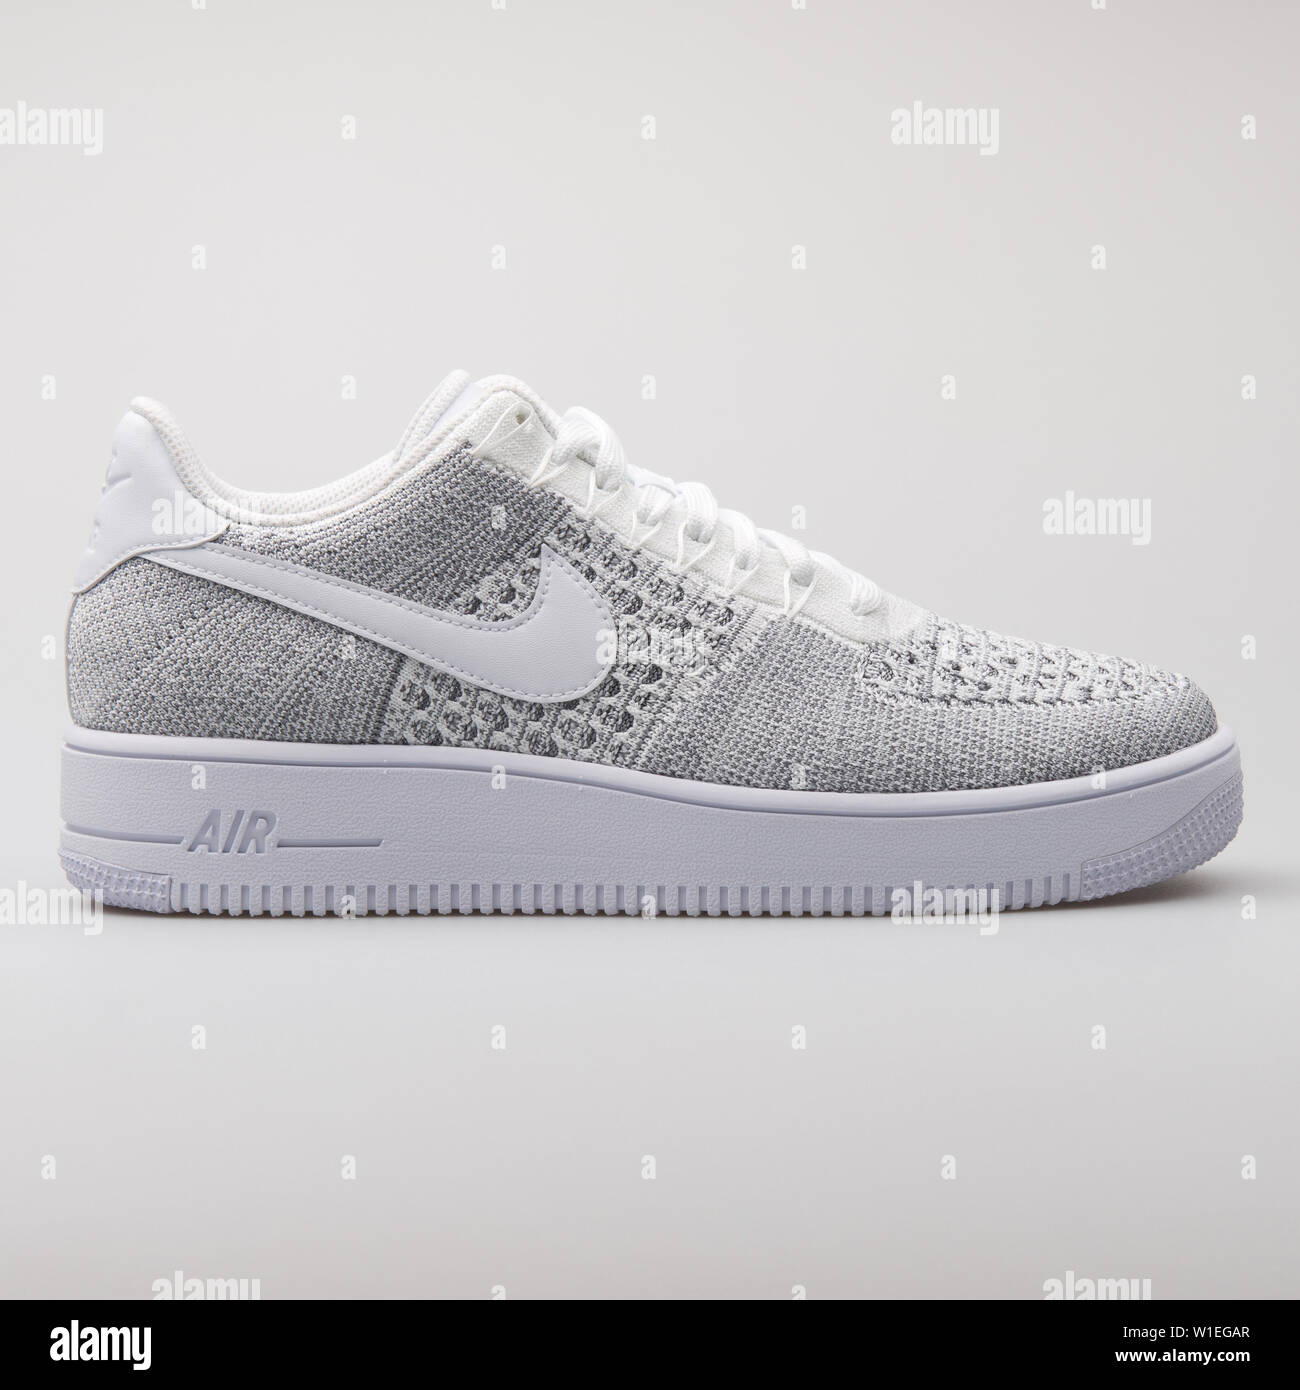 VIENNA, AUSTRIA - AUGUST 7, 2017: Nike Air Force 1 Ultra Flyknit Low grey  sneaker on white background Stock Photo - Alamy